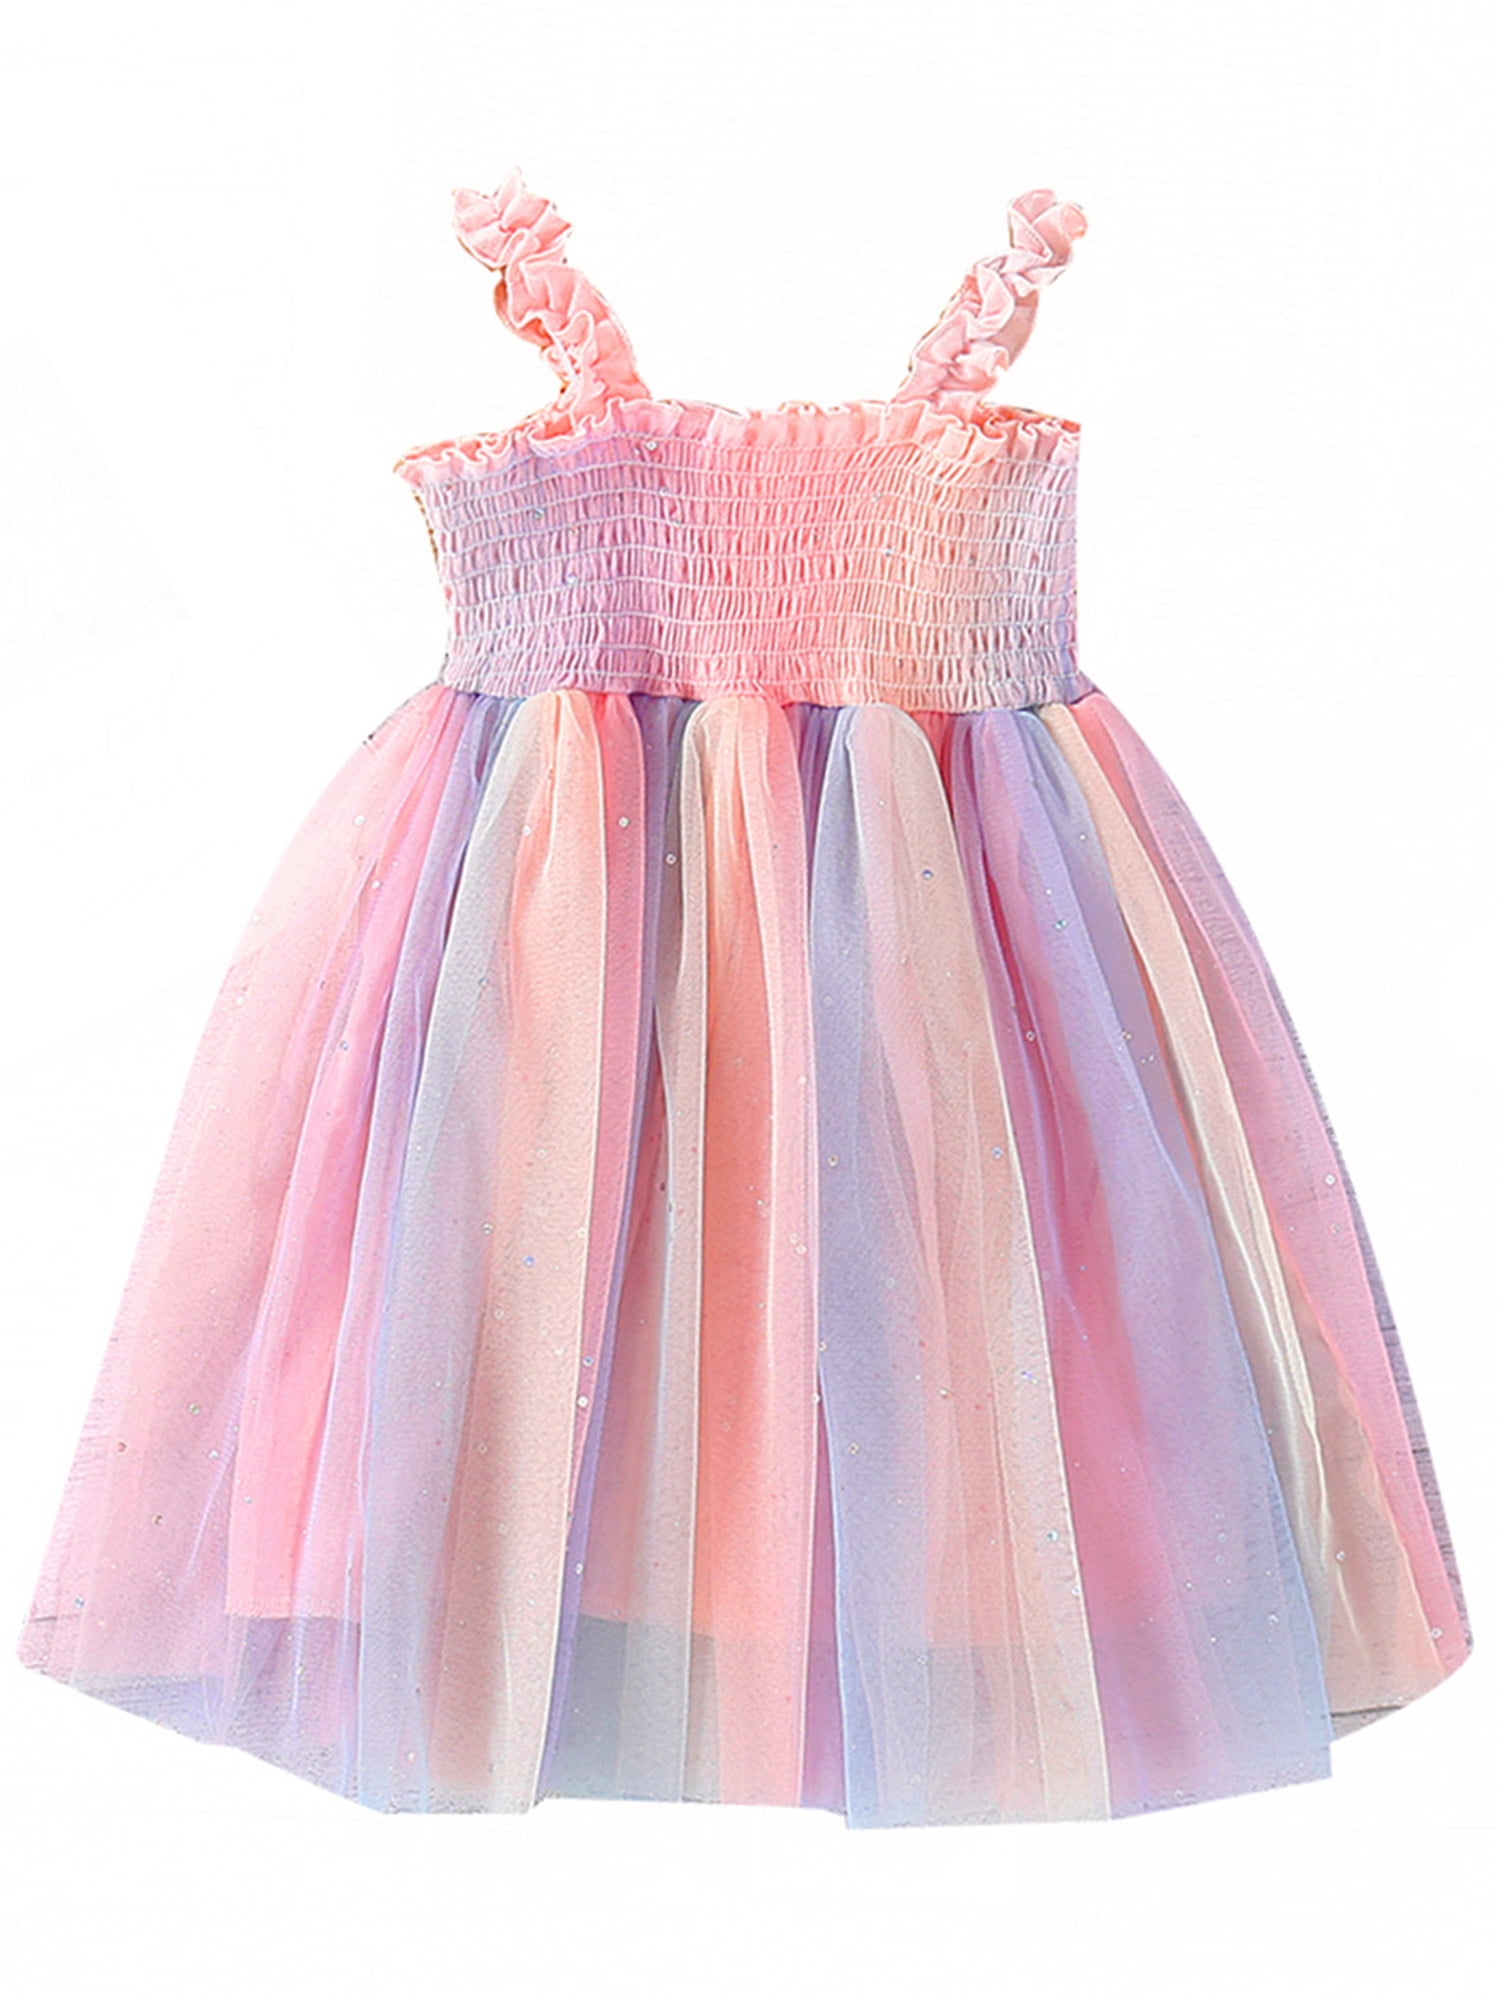 Baby Toddler Girl Summer Princess Birthday Party Pageant Tutu Tulle Dress 1-3T 